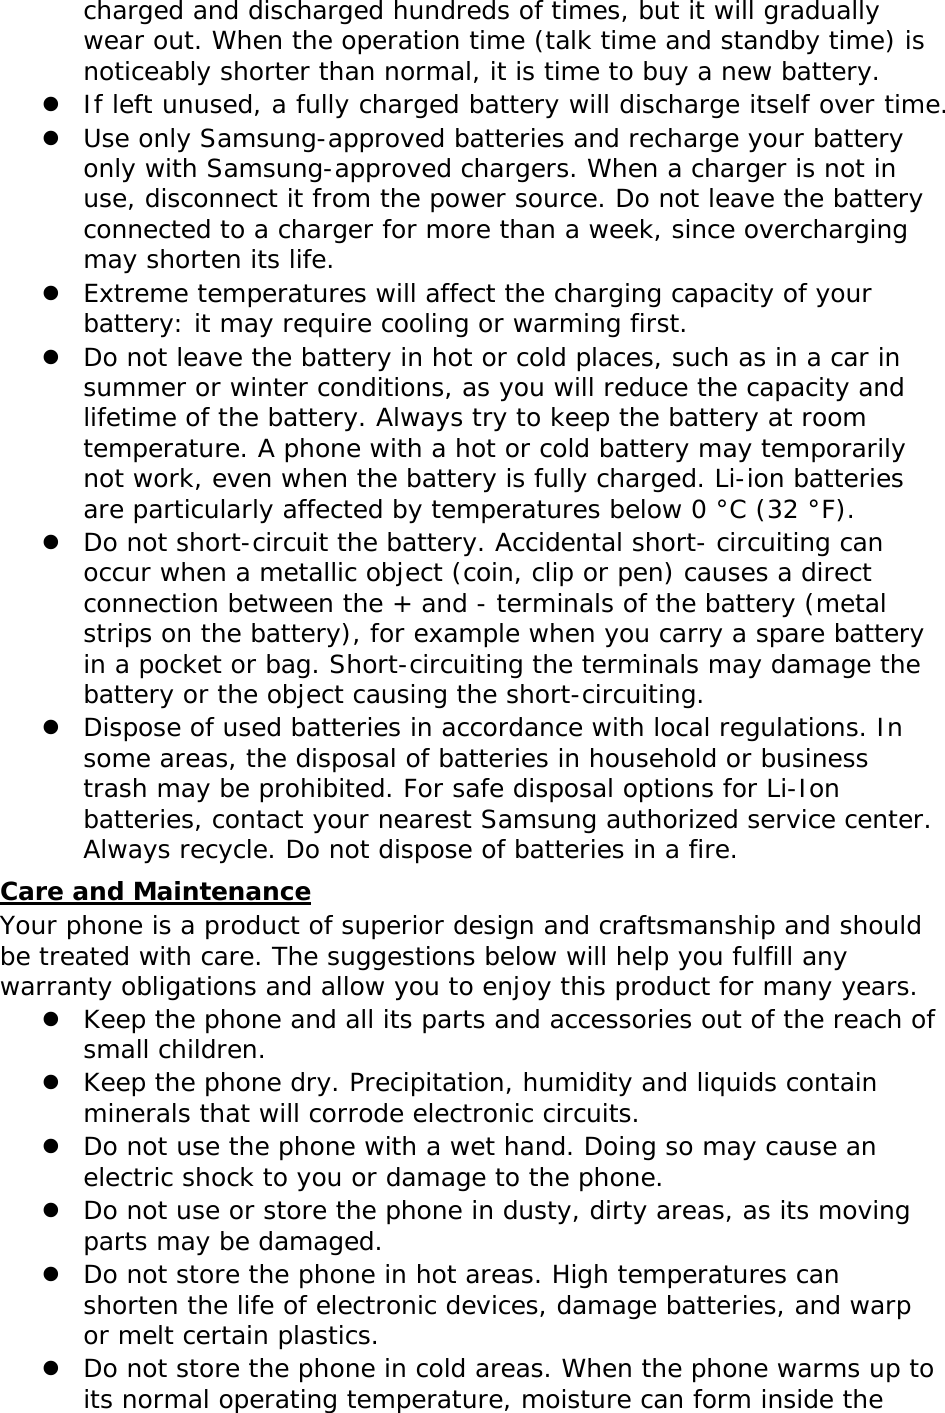 charged and discharged hundreds of times, but it will gradually wear out. When the operation time (talk time and standby time) is noticeably shorter than normal, it is time to buy a new battery. z If left unused, a fully charged battery will discharge itself over time. z Use only Samsung-approved batteries and recharge your battery only with Samsung-approved chargers. When a charger is not in use, disconnect it from the power source. Do not leave the battery connected to a charger for more than a week, since overcharging may shorten its life. z Extreme temperatures will affect the charging capacity of your battery: it may require cooling or warming first. z Do not leave the battery in hot or cold places, such as in a car in summer or winter conditions, as you will reduce the capacity and lifetime of the battery. Always try to keep the battery at room temperature. A phone with a hot or cold battery may temporarily not work, even when the battery is fully charged. Li-ion batteries are particularly affected by temperatures below 0 °C (32 °F). z Do not short-circuit the battery. Accidental short- circuiting can occur when a metallic object (coin, clip or pen) causes a direct connection between the + and - terminals of the battery (metal strips on the battery), for example when you carry a spare battery in a pocket or bag. Short-circuiting the terminals may damage the battery or the object causing the short-circuiting. z Dispose of used batteries in accordance with local regulations. In some areas, the disposal of batteries in household or business trash may be prohibited. For safe disposal options for Li-Ion batteries, contact your nearest Samsung authorized service center. Always recycle. Do not dispose of batteries in a fire. Care and Maintenance Your phone is a product of superior design and craftsmanship and should be treated with care. The suggestions below will help you fulfill any warranty obligations and allow you to enjoy this product for many years. z Keep the phone and all its parts and accessories out of the reach of small children. z Keep the phone dry. Precipitation, humidity and liquids contain minerals that will corrode electronic circuits. z Do not use the phone with a wet hand. Doing so may cause an electric shock to you or damage to the phone. z Do not use or store the phone in dusty, dirty areas, as its moving parts may be damaged. z Do not store the phone in hot areas. High temperatures can shorten the life of electronic devices, damage batteries, and warp or melt certain plastics. z Do not store the phone in cold areas. When the phone warms up to its normal operating temperature, moisture can form inside the 